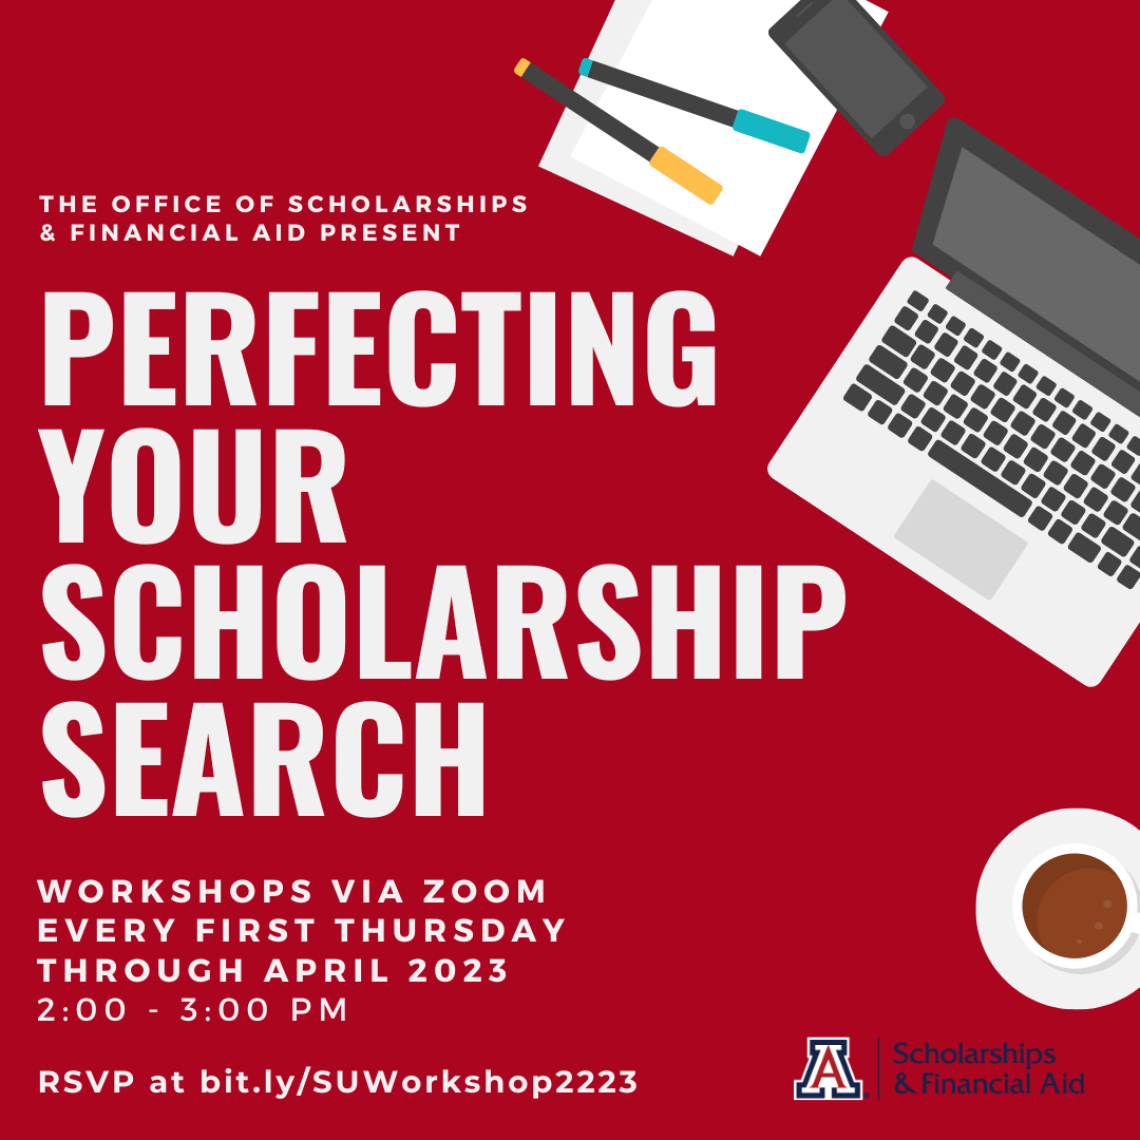 Perfecting Your Scholarship Search flyer with dates/times and RSVP link